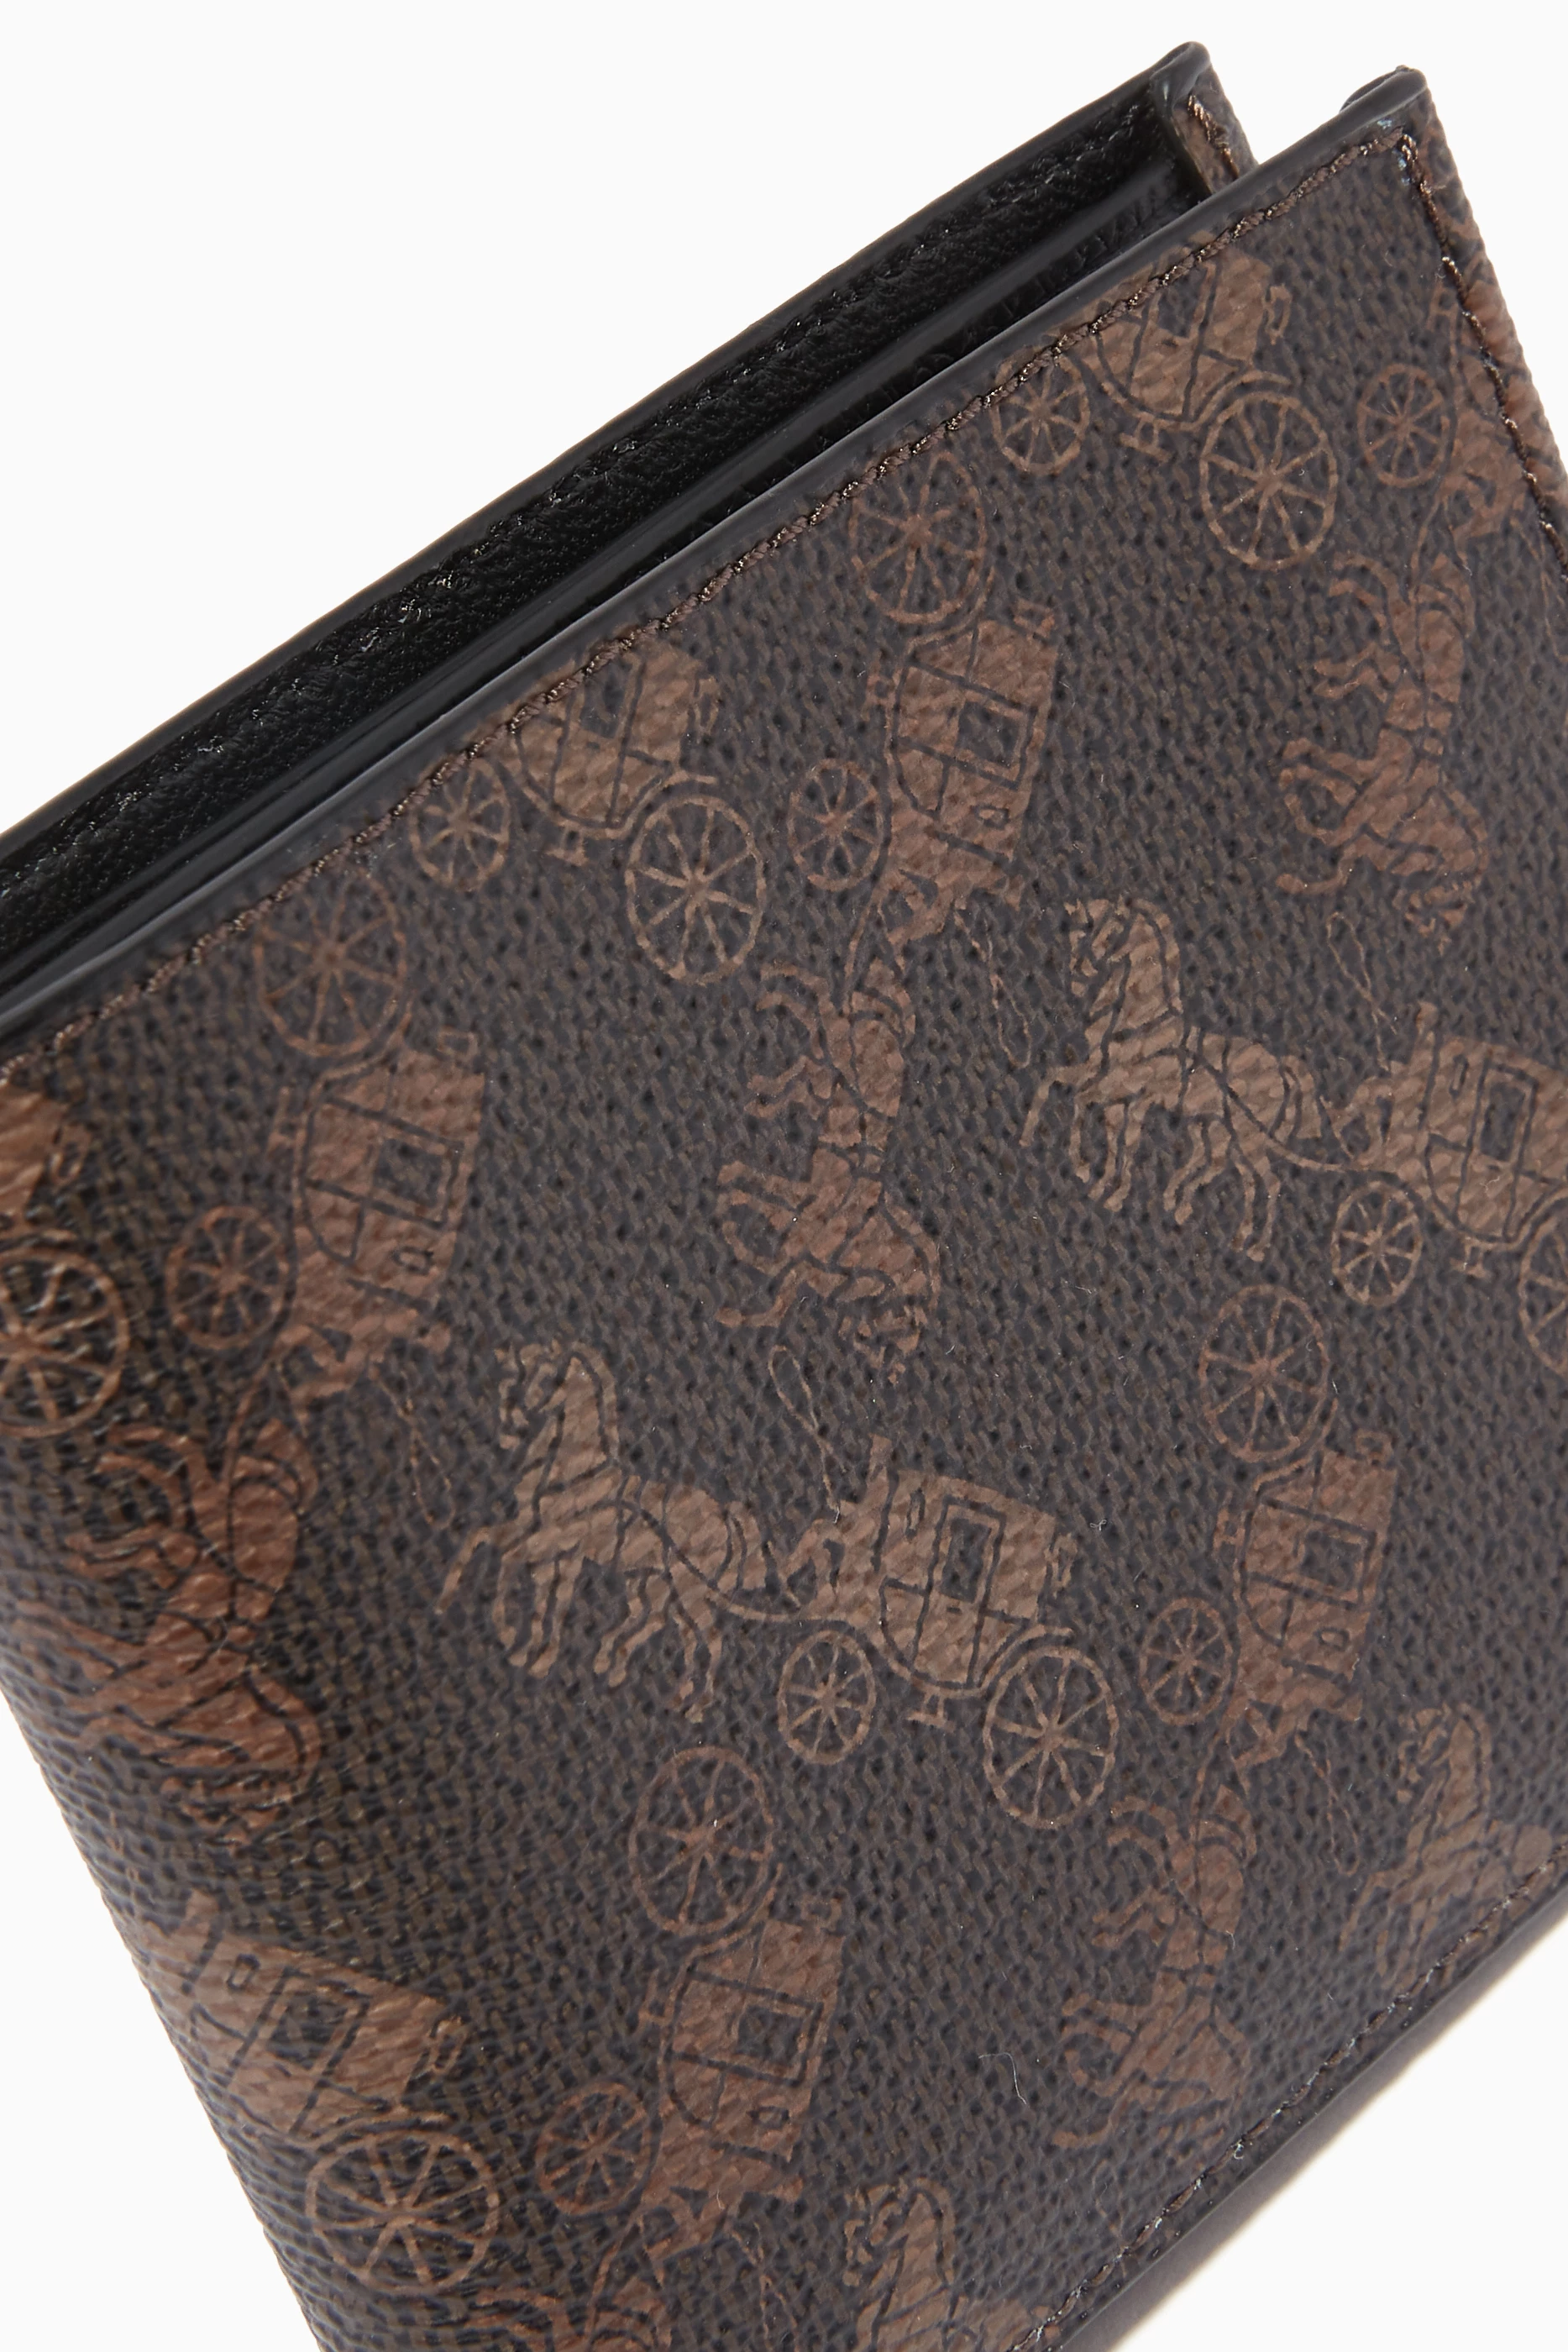 Coach Double Billfold Wallet with Large Horse and Carriage Print - Men's Wallets - Truffle/Burnished Amber